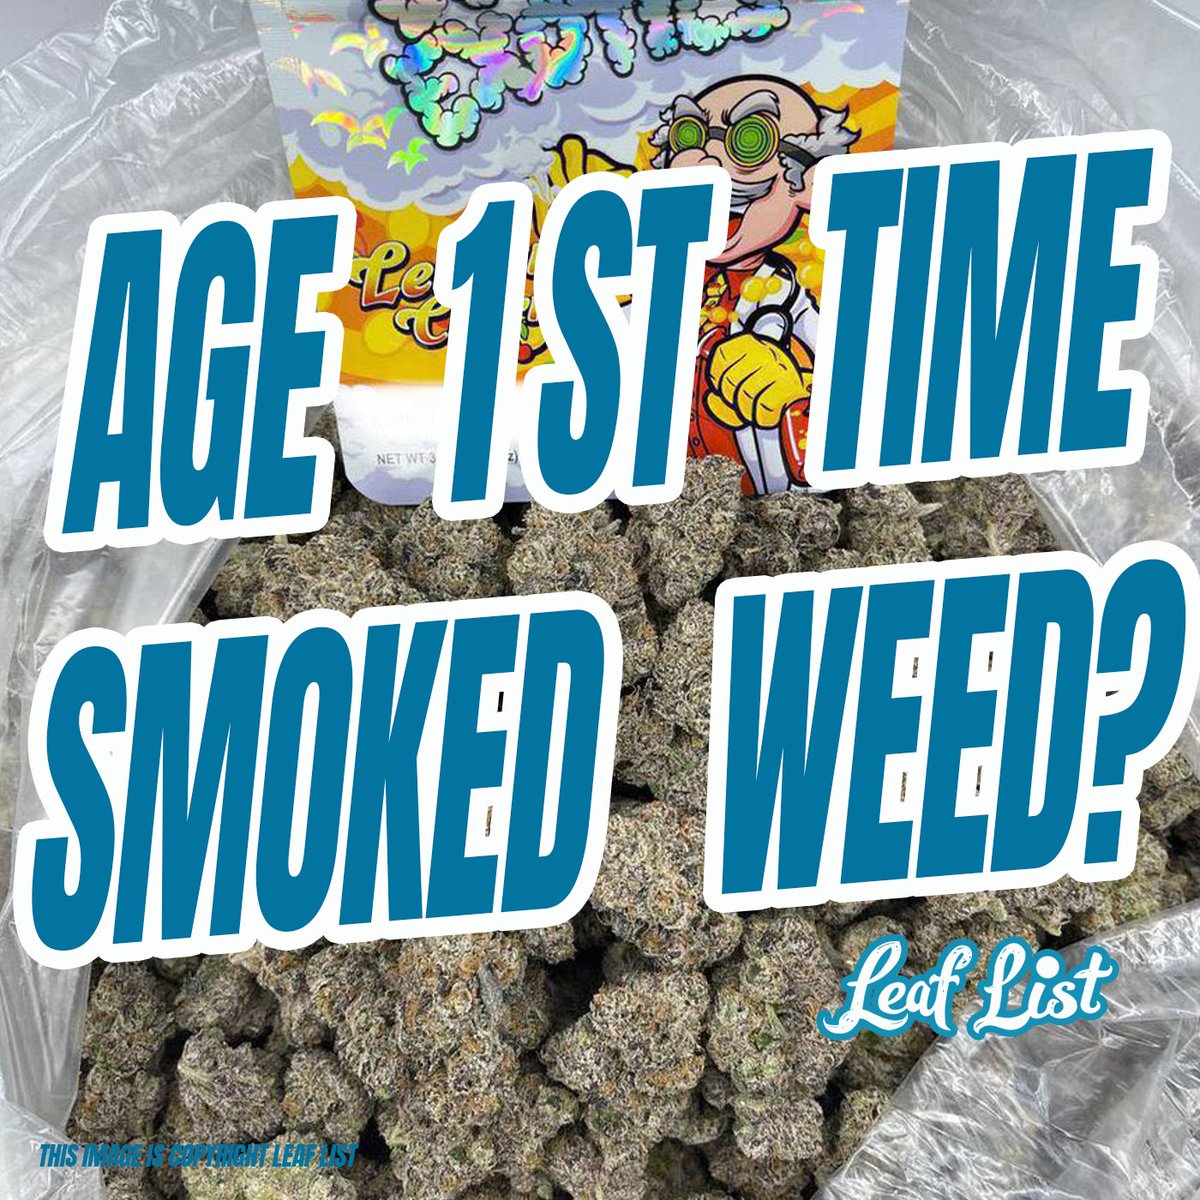 Asking again for all the new folks.  What was the age you first got high?